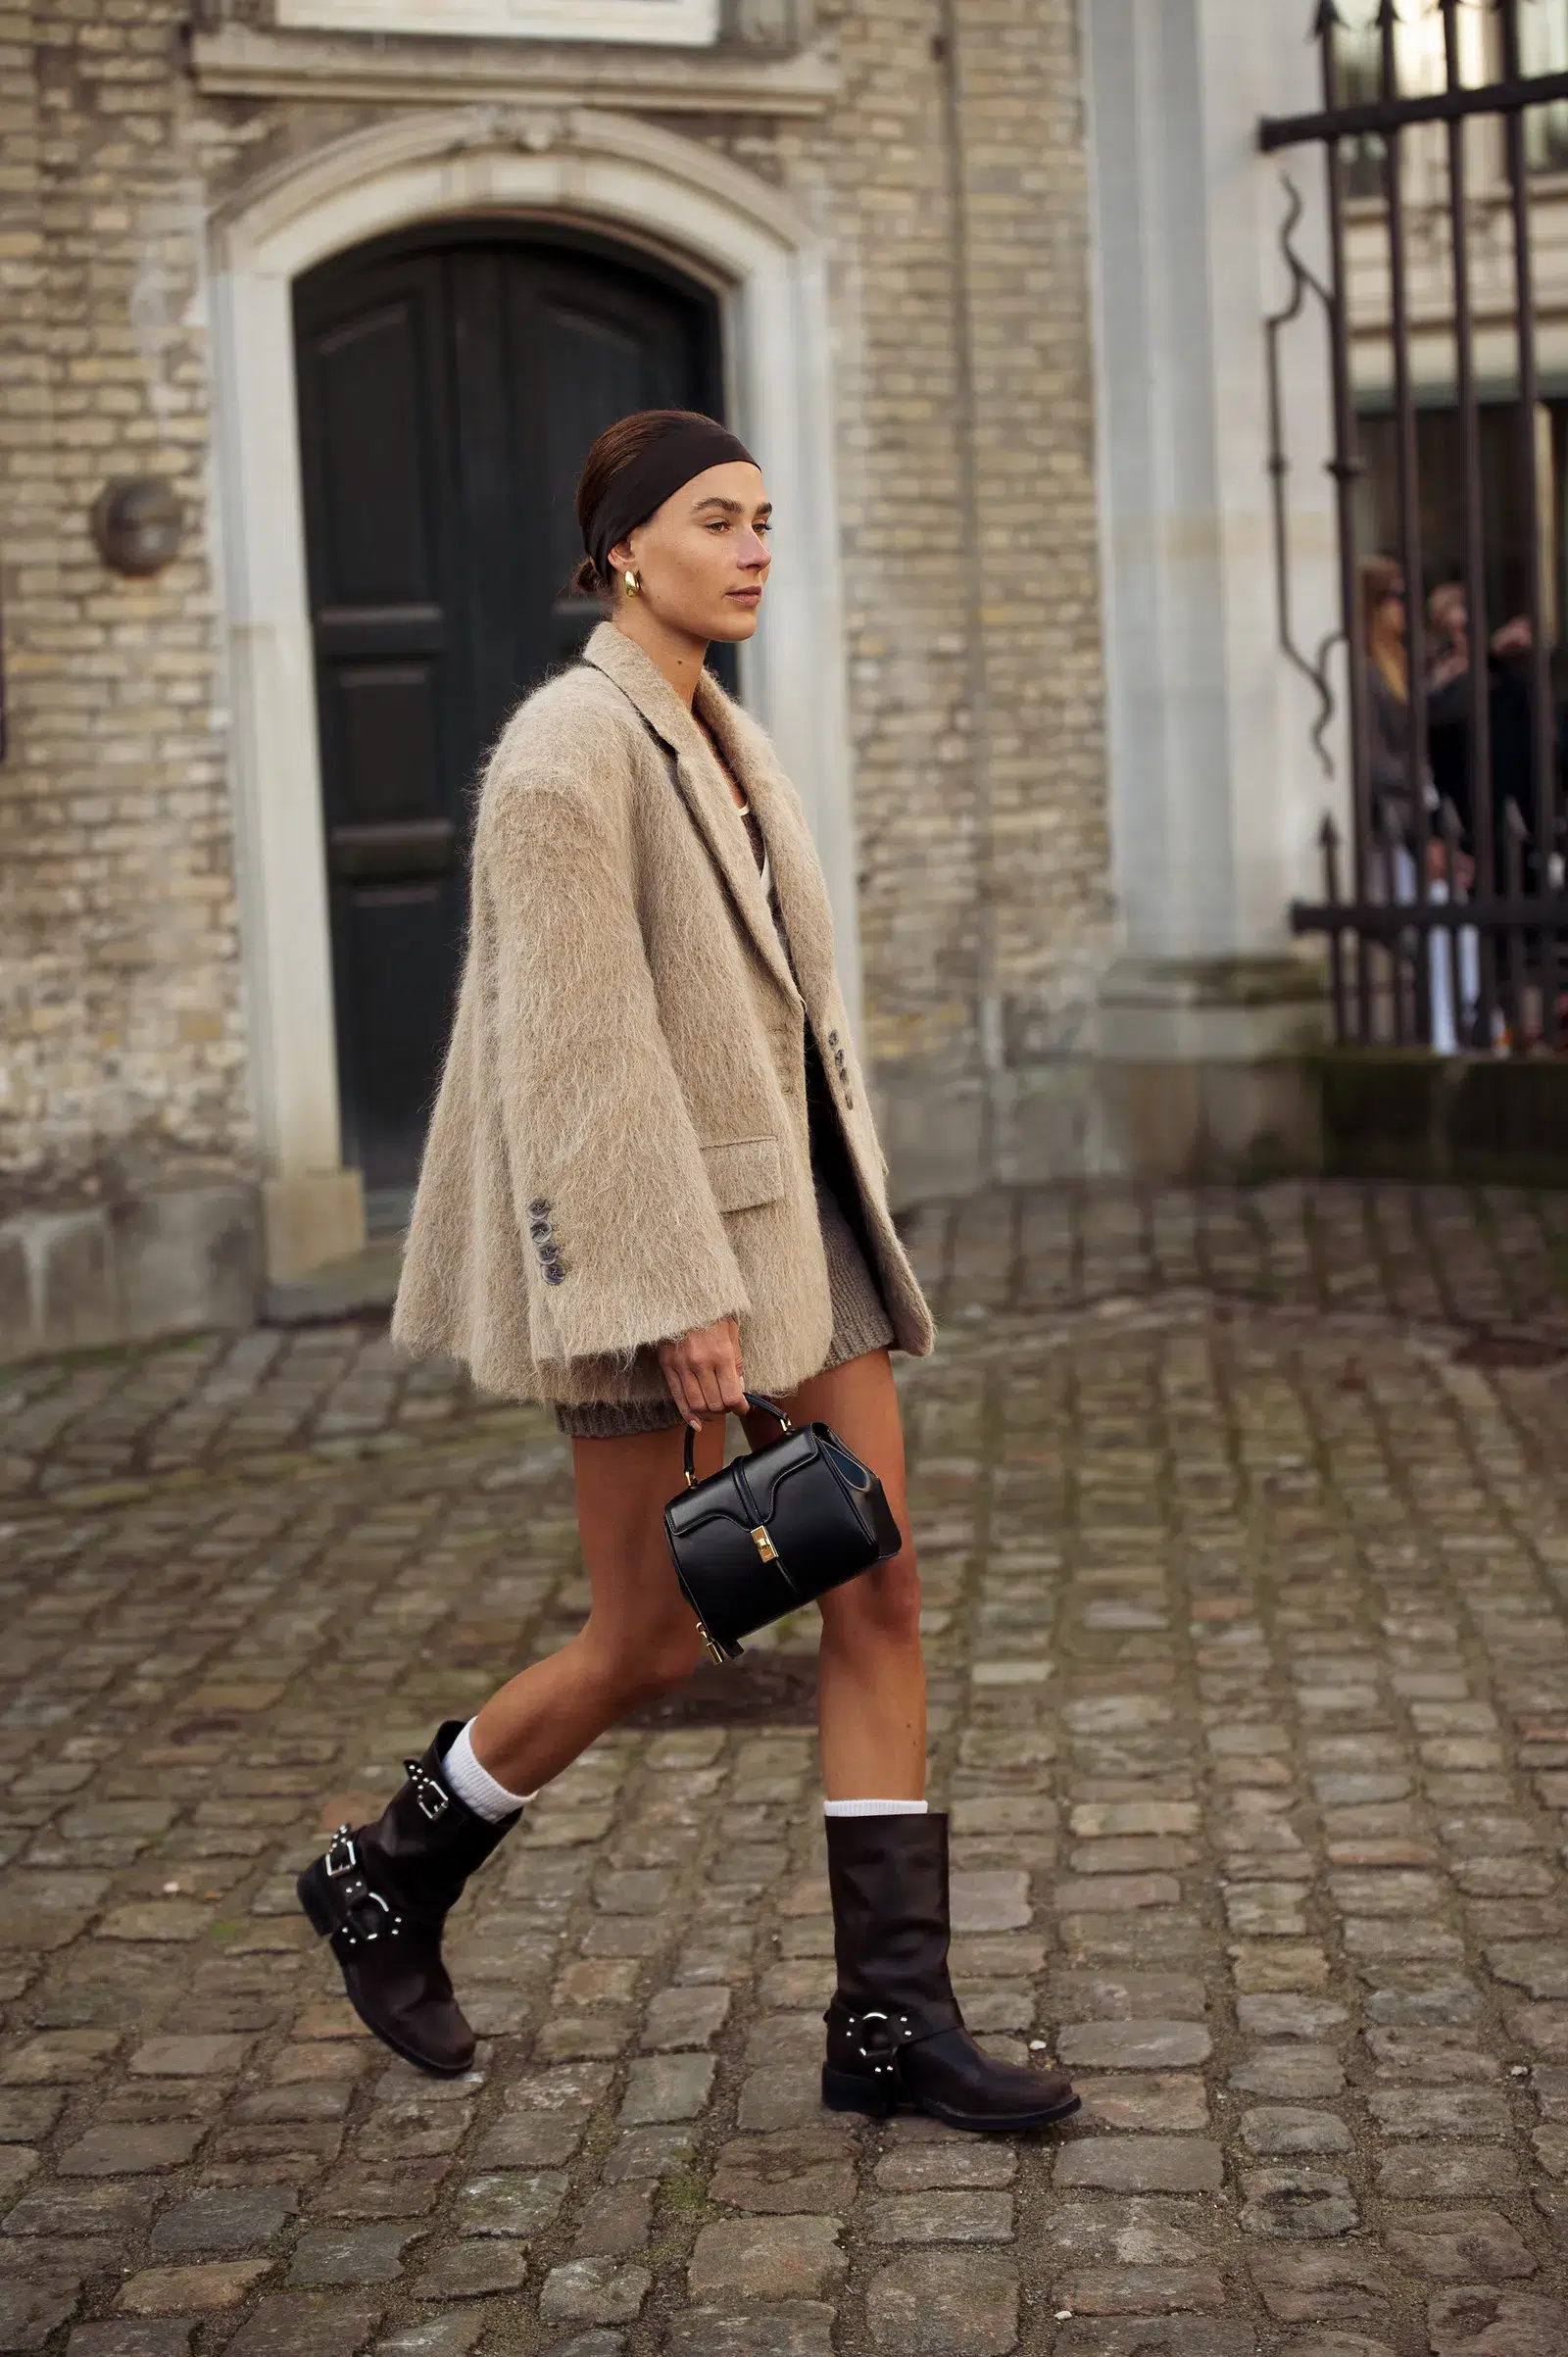 Biker Boots: 2010's cult boots are back this autumn - HIGHXTAR.